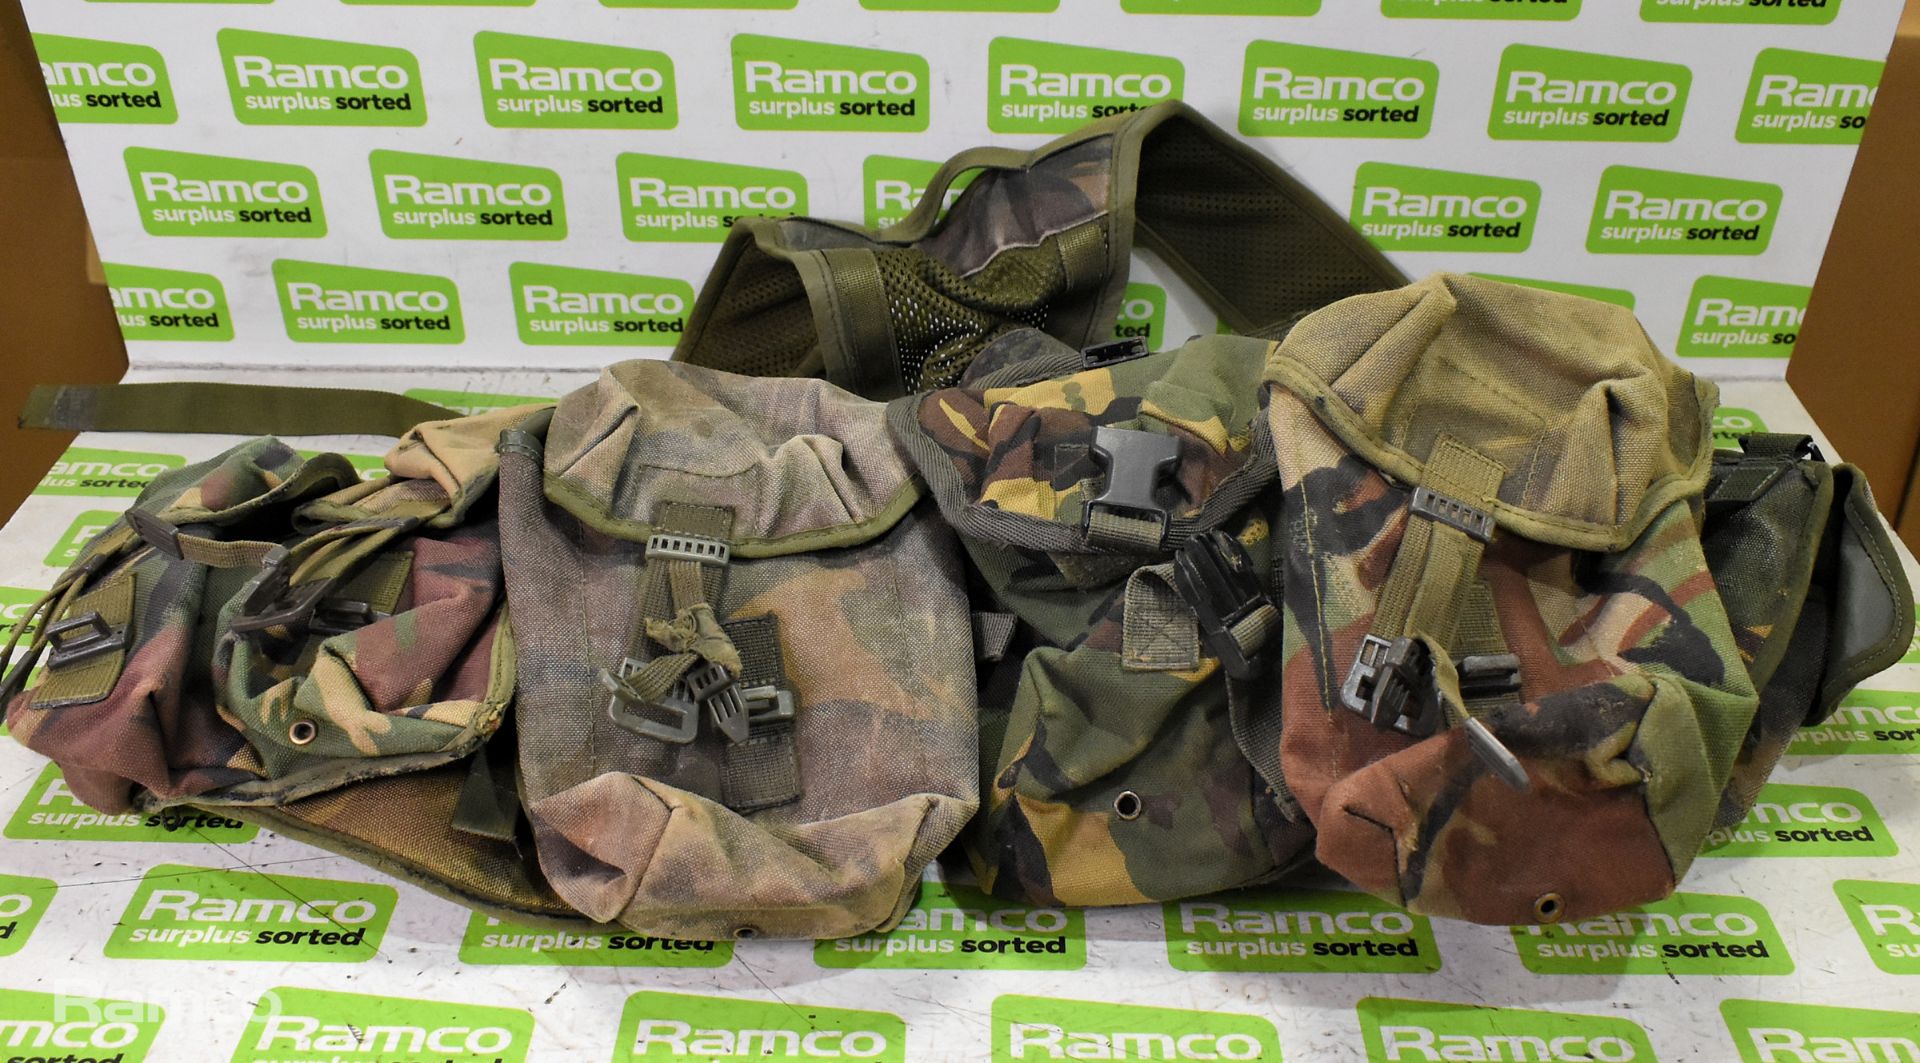 38x British Army DPM vests with pouches - mixed grades and sizes - Image 4 of 6